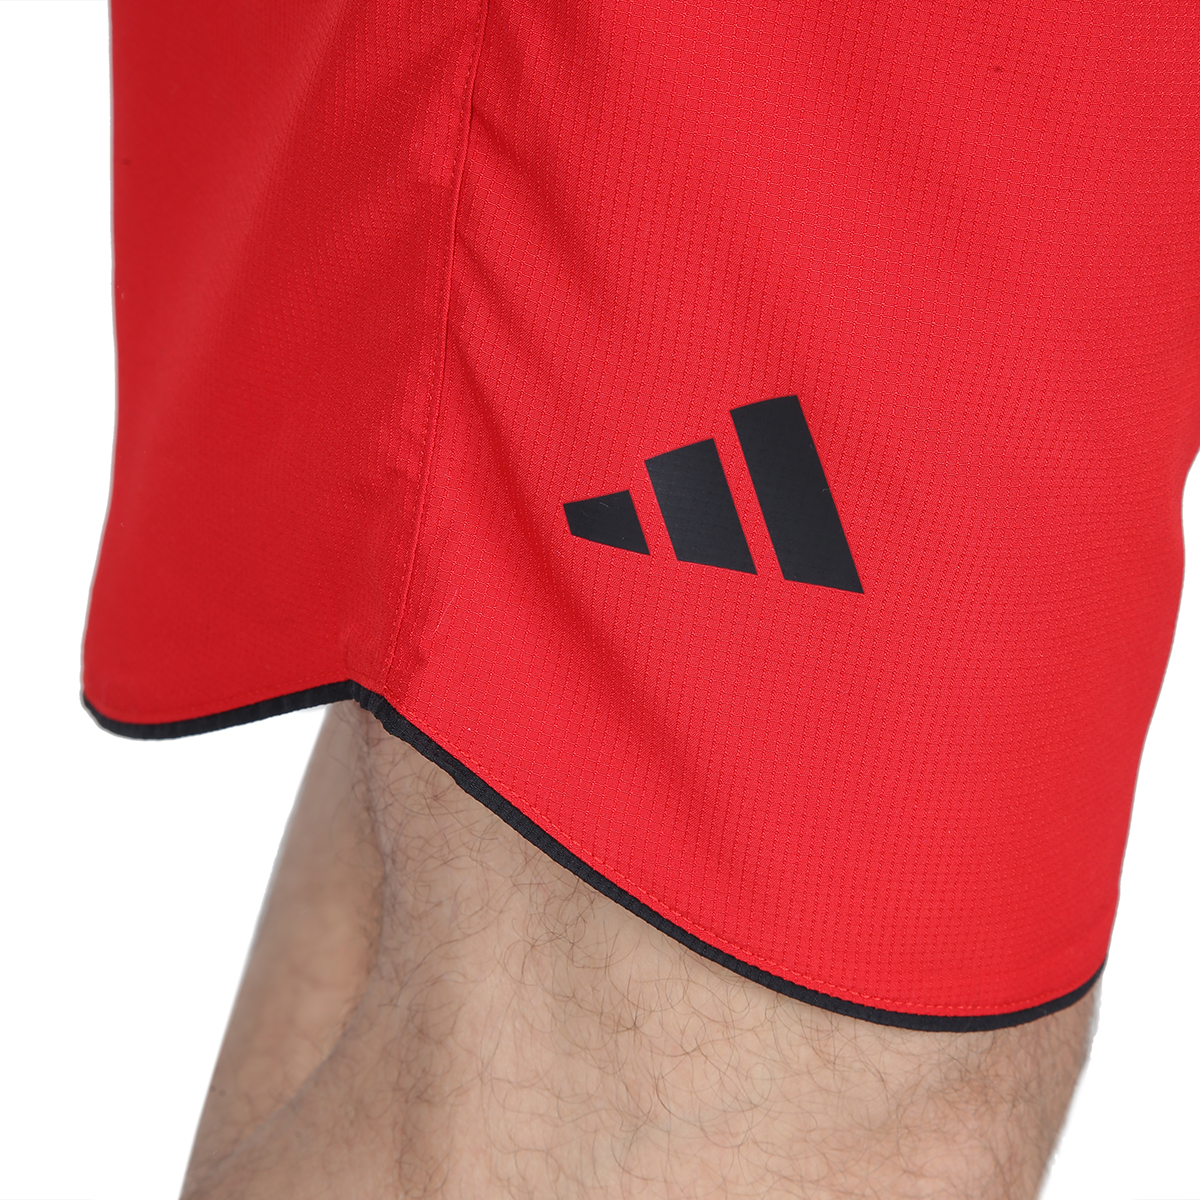 Short Tenis adidas Club Hombre,  image number null